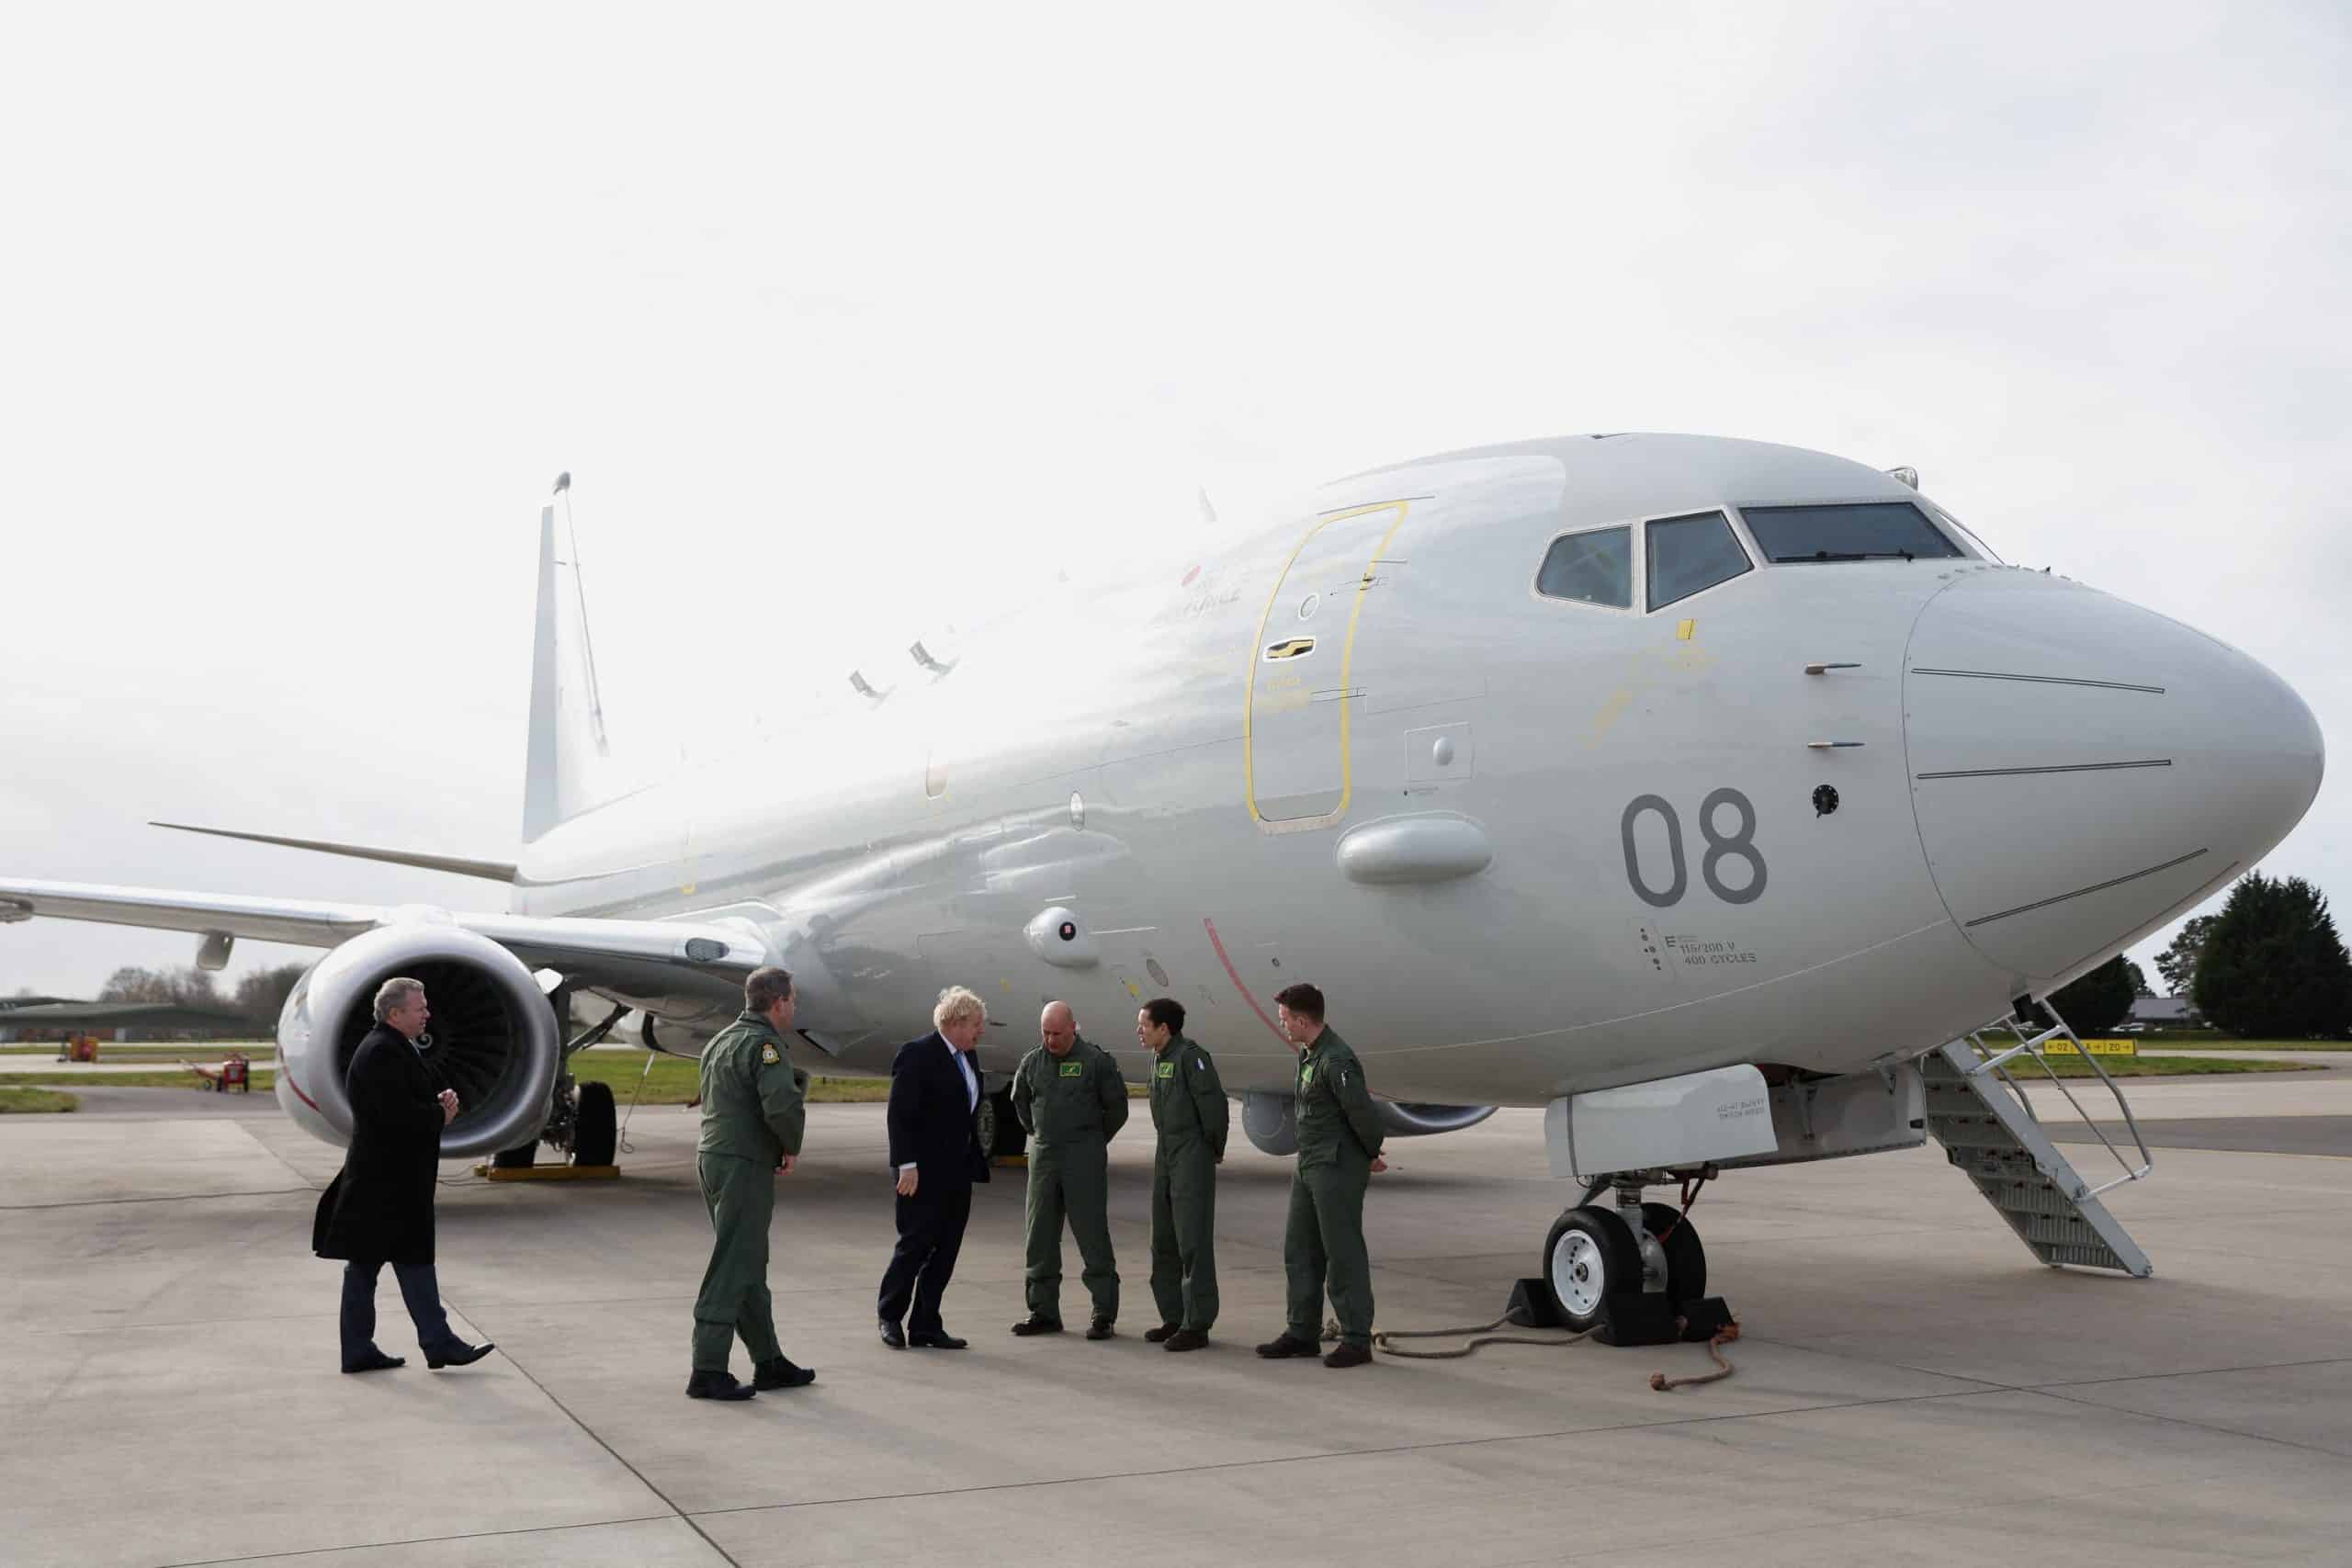 Greenest govt ever? RAF aircraft flew hundreds of miles to and from PM’s photoshoot